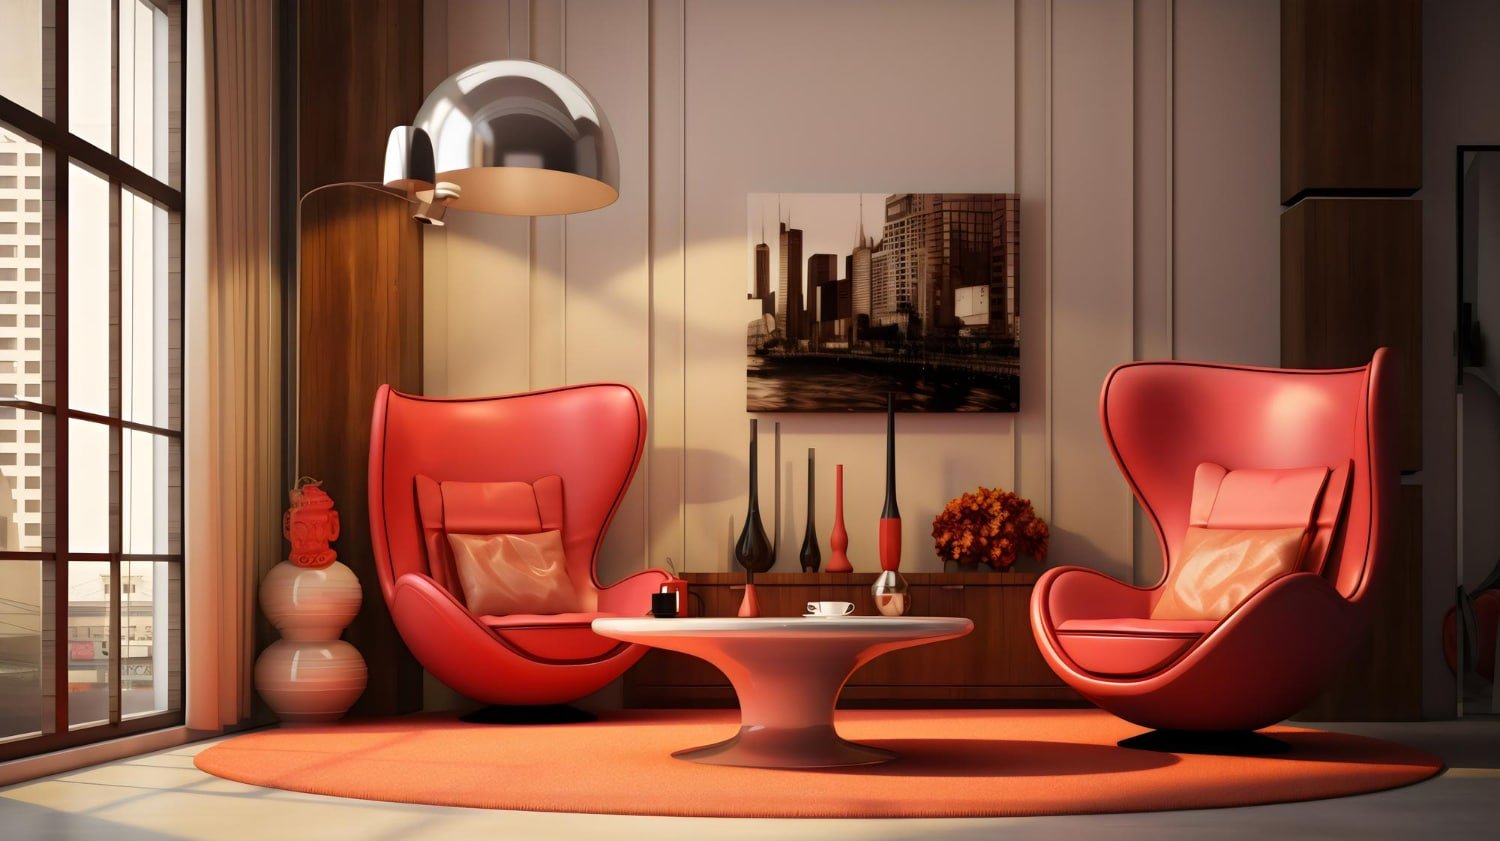 Furnish Your Home With Style With Rove Concepts’s Modern Furniture Designs